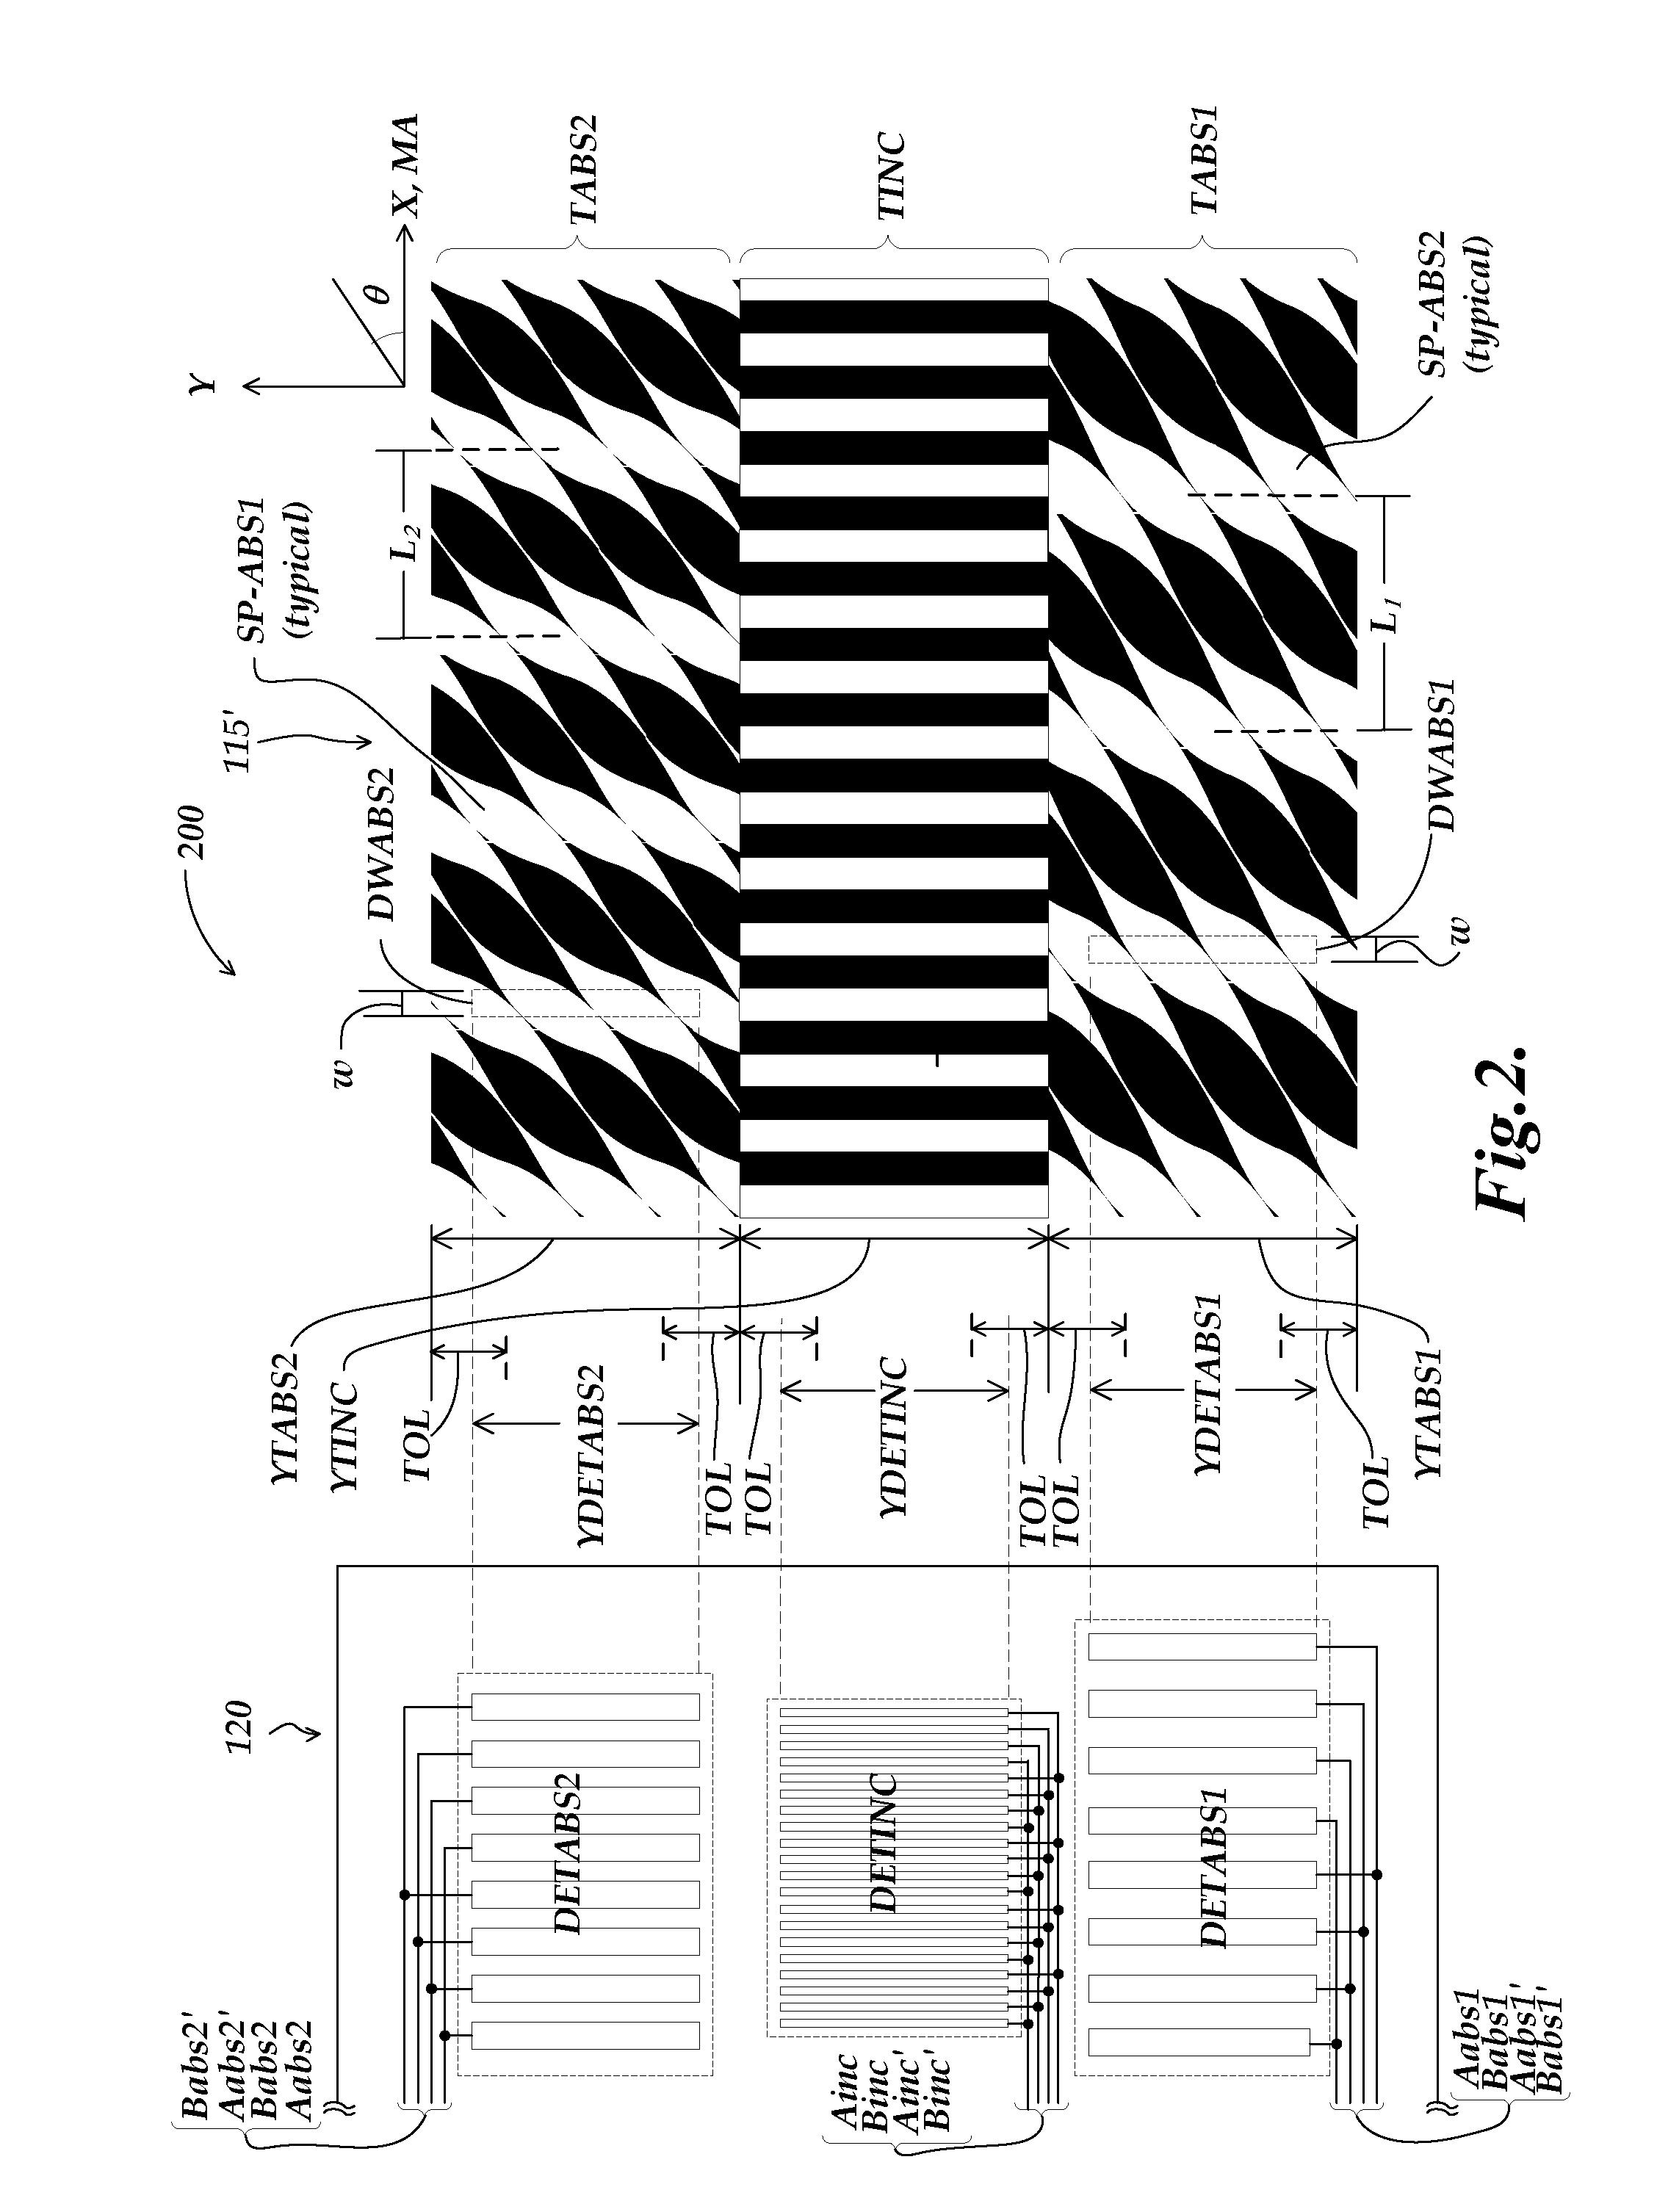 Absolute optical encoder with long range intensity modulation on scale